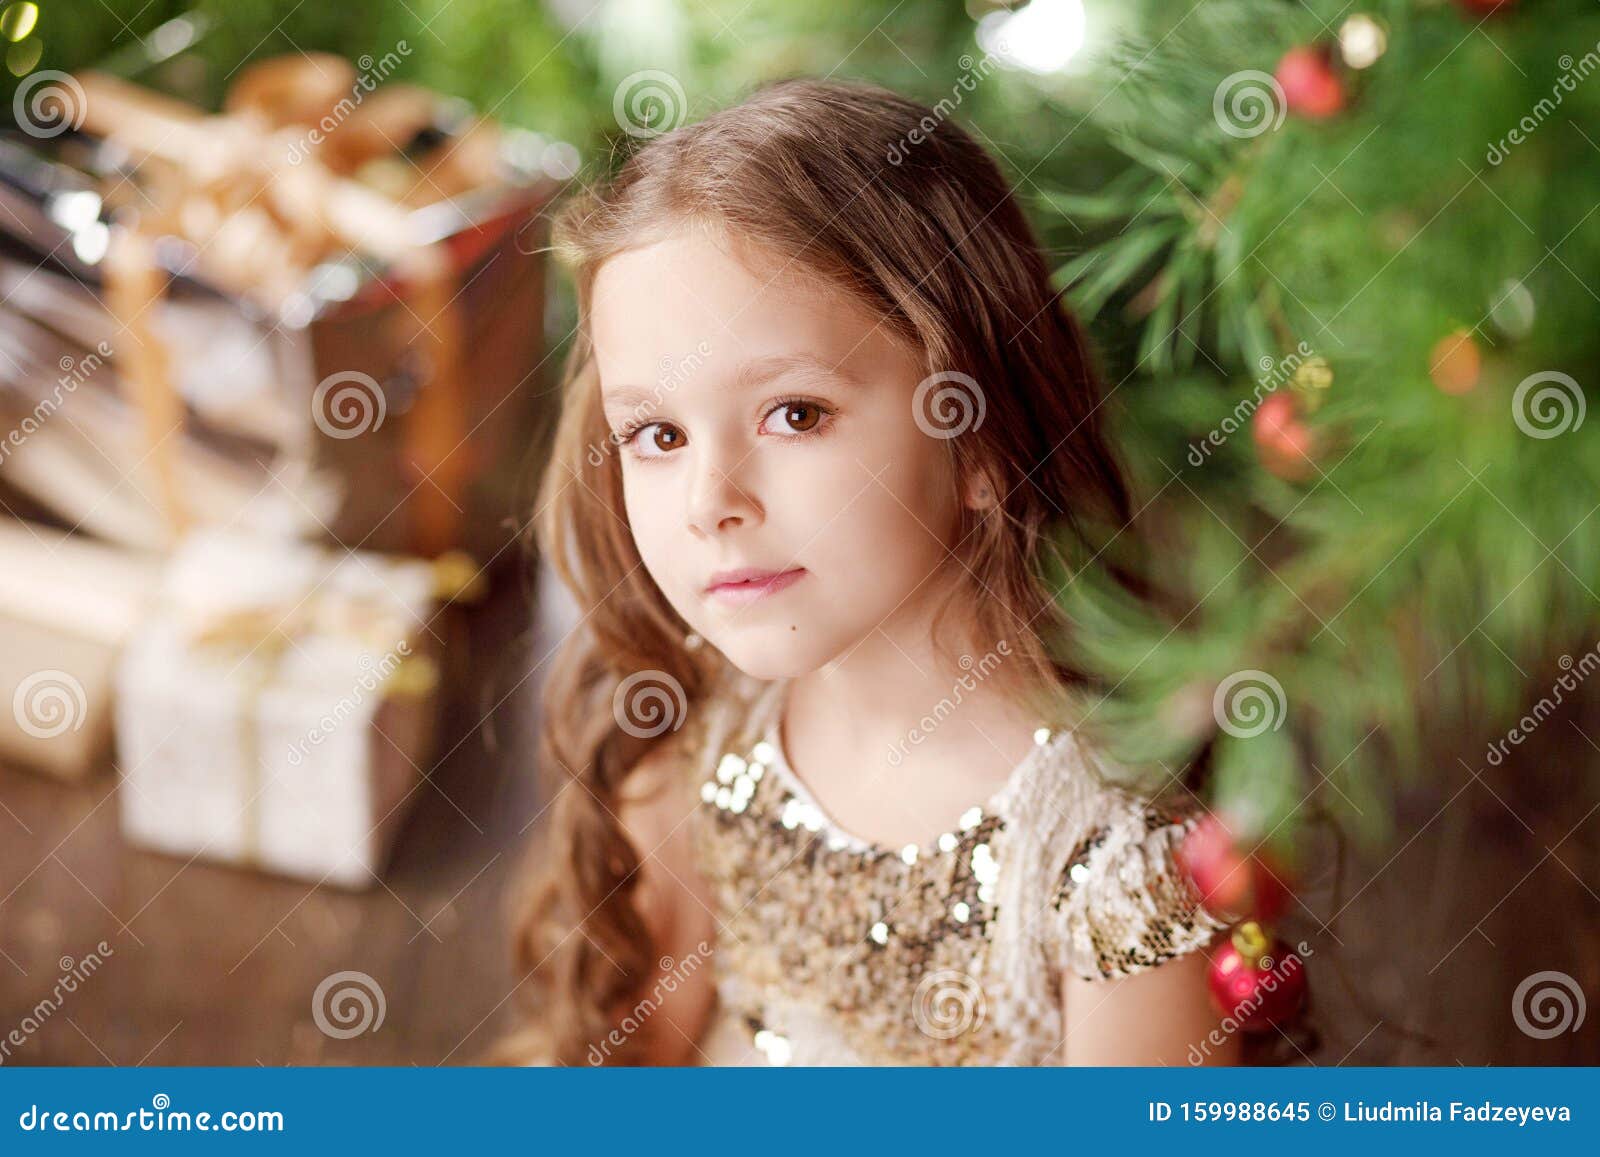 Portrait of a Cute Long-haired Little Girl in Dress on Background of ...